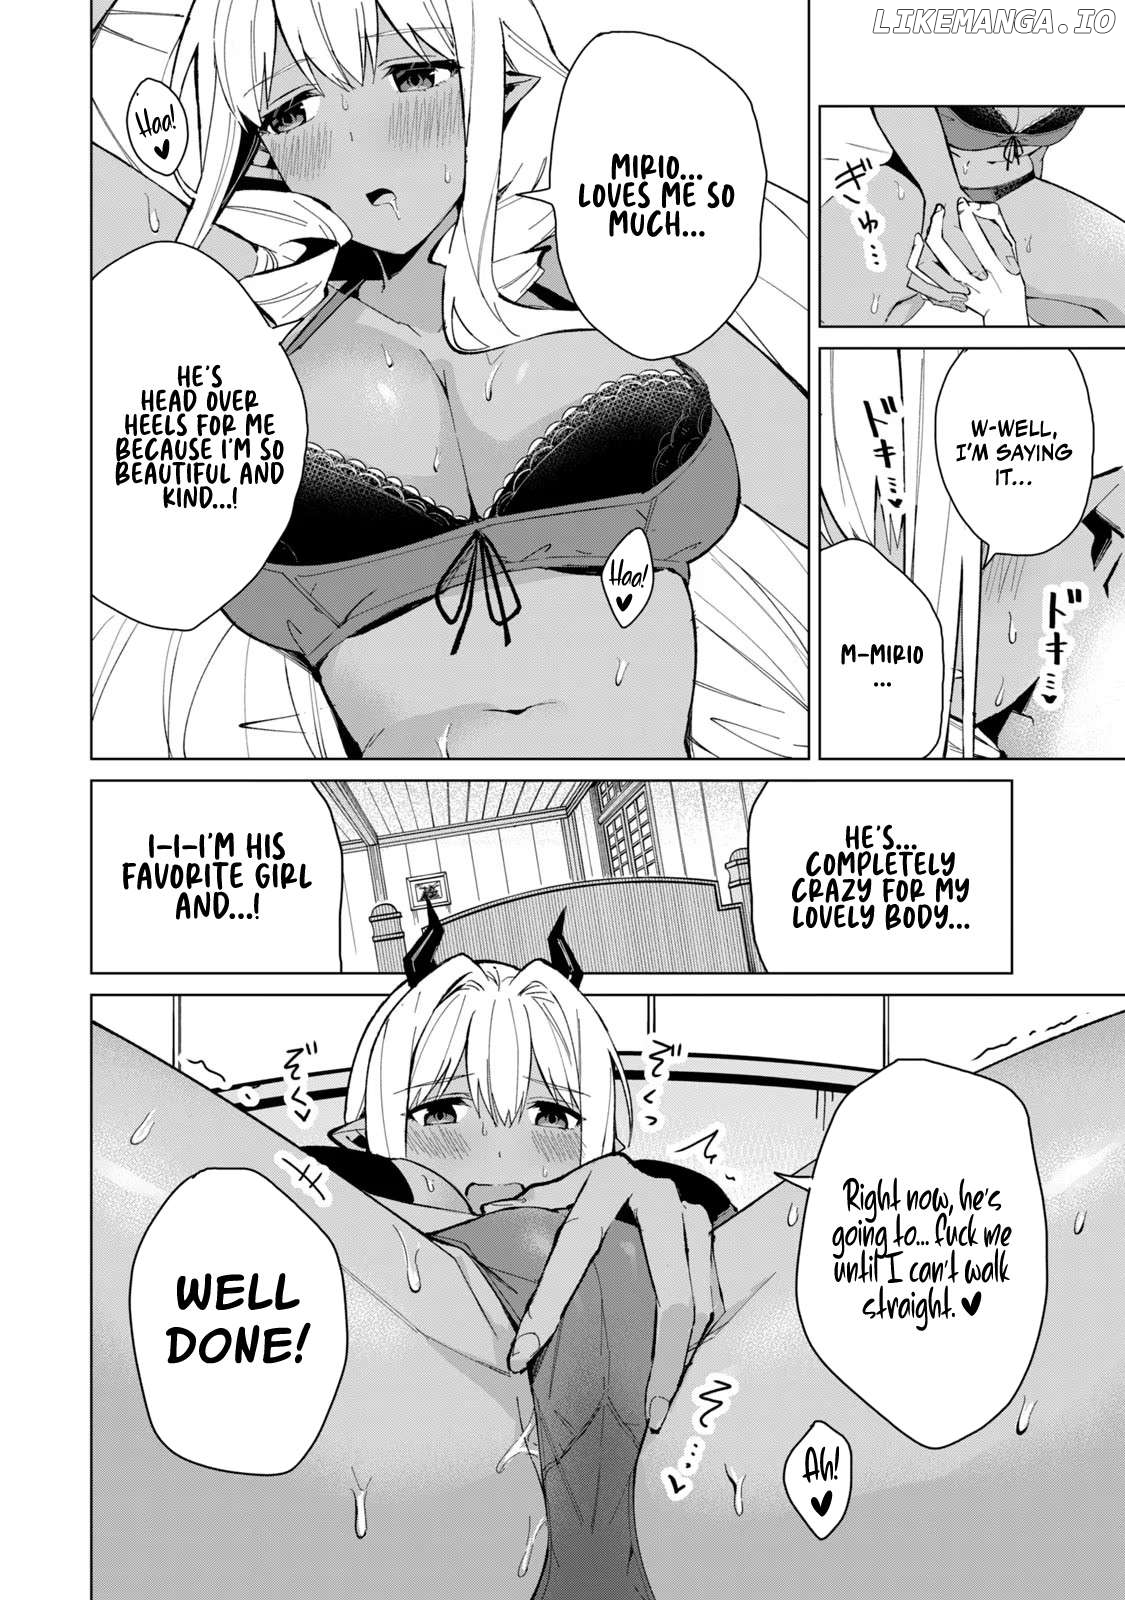 A Story About A Hero Exterminating A Dragon-Class Beautiful Girl Demon Queen, Who Has Very Low Self-Esteem, With Love! Chapter 22 - page 15